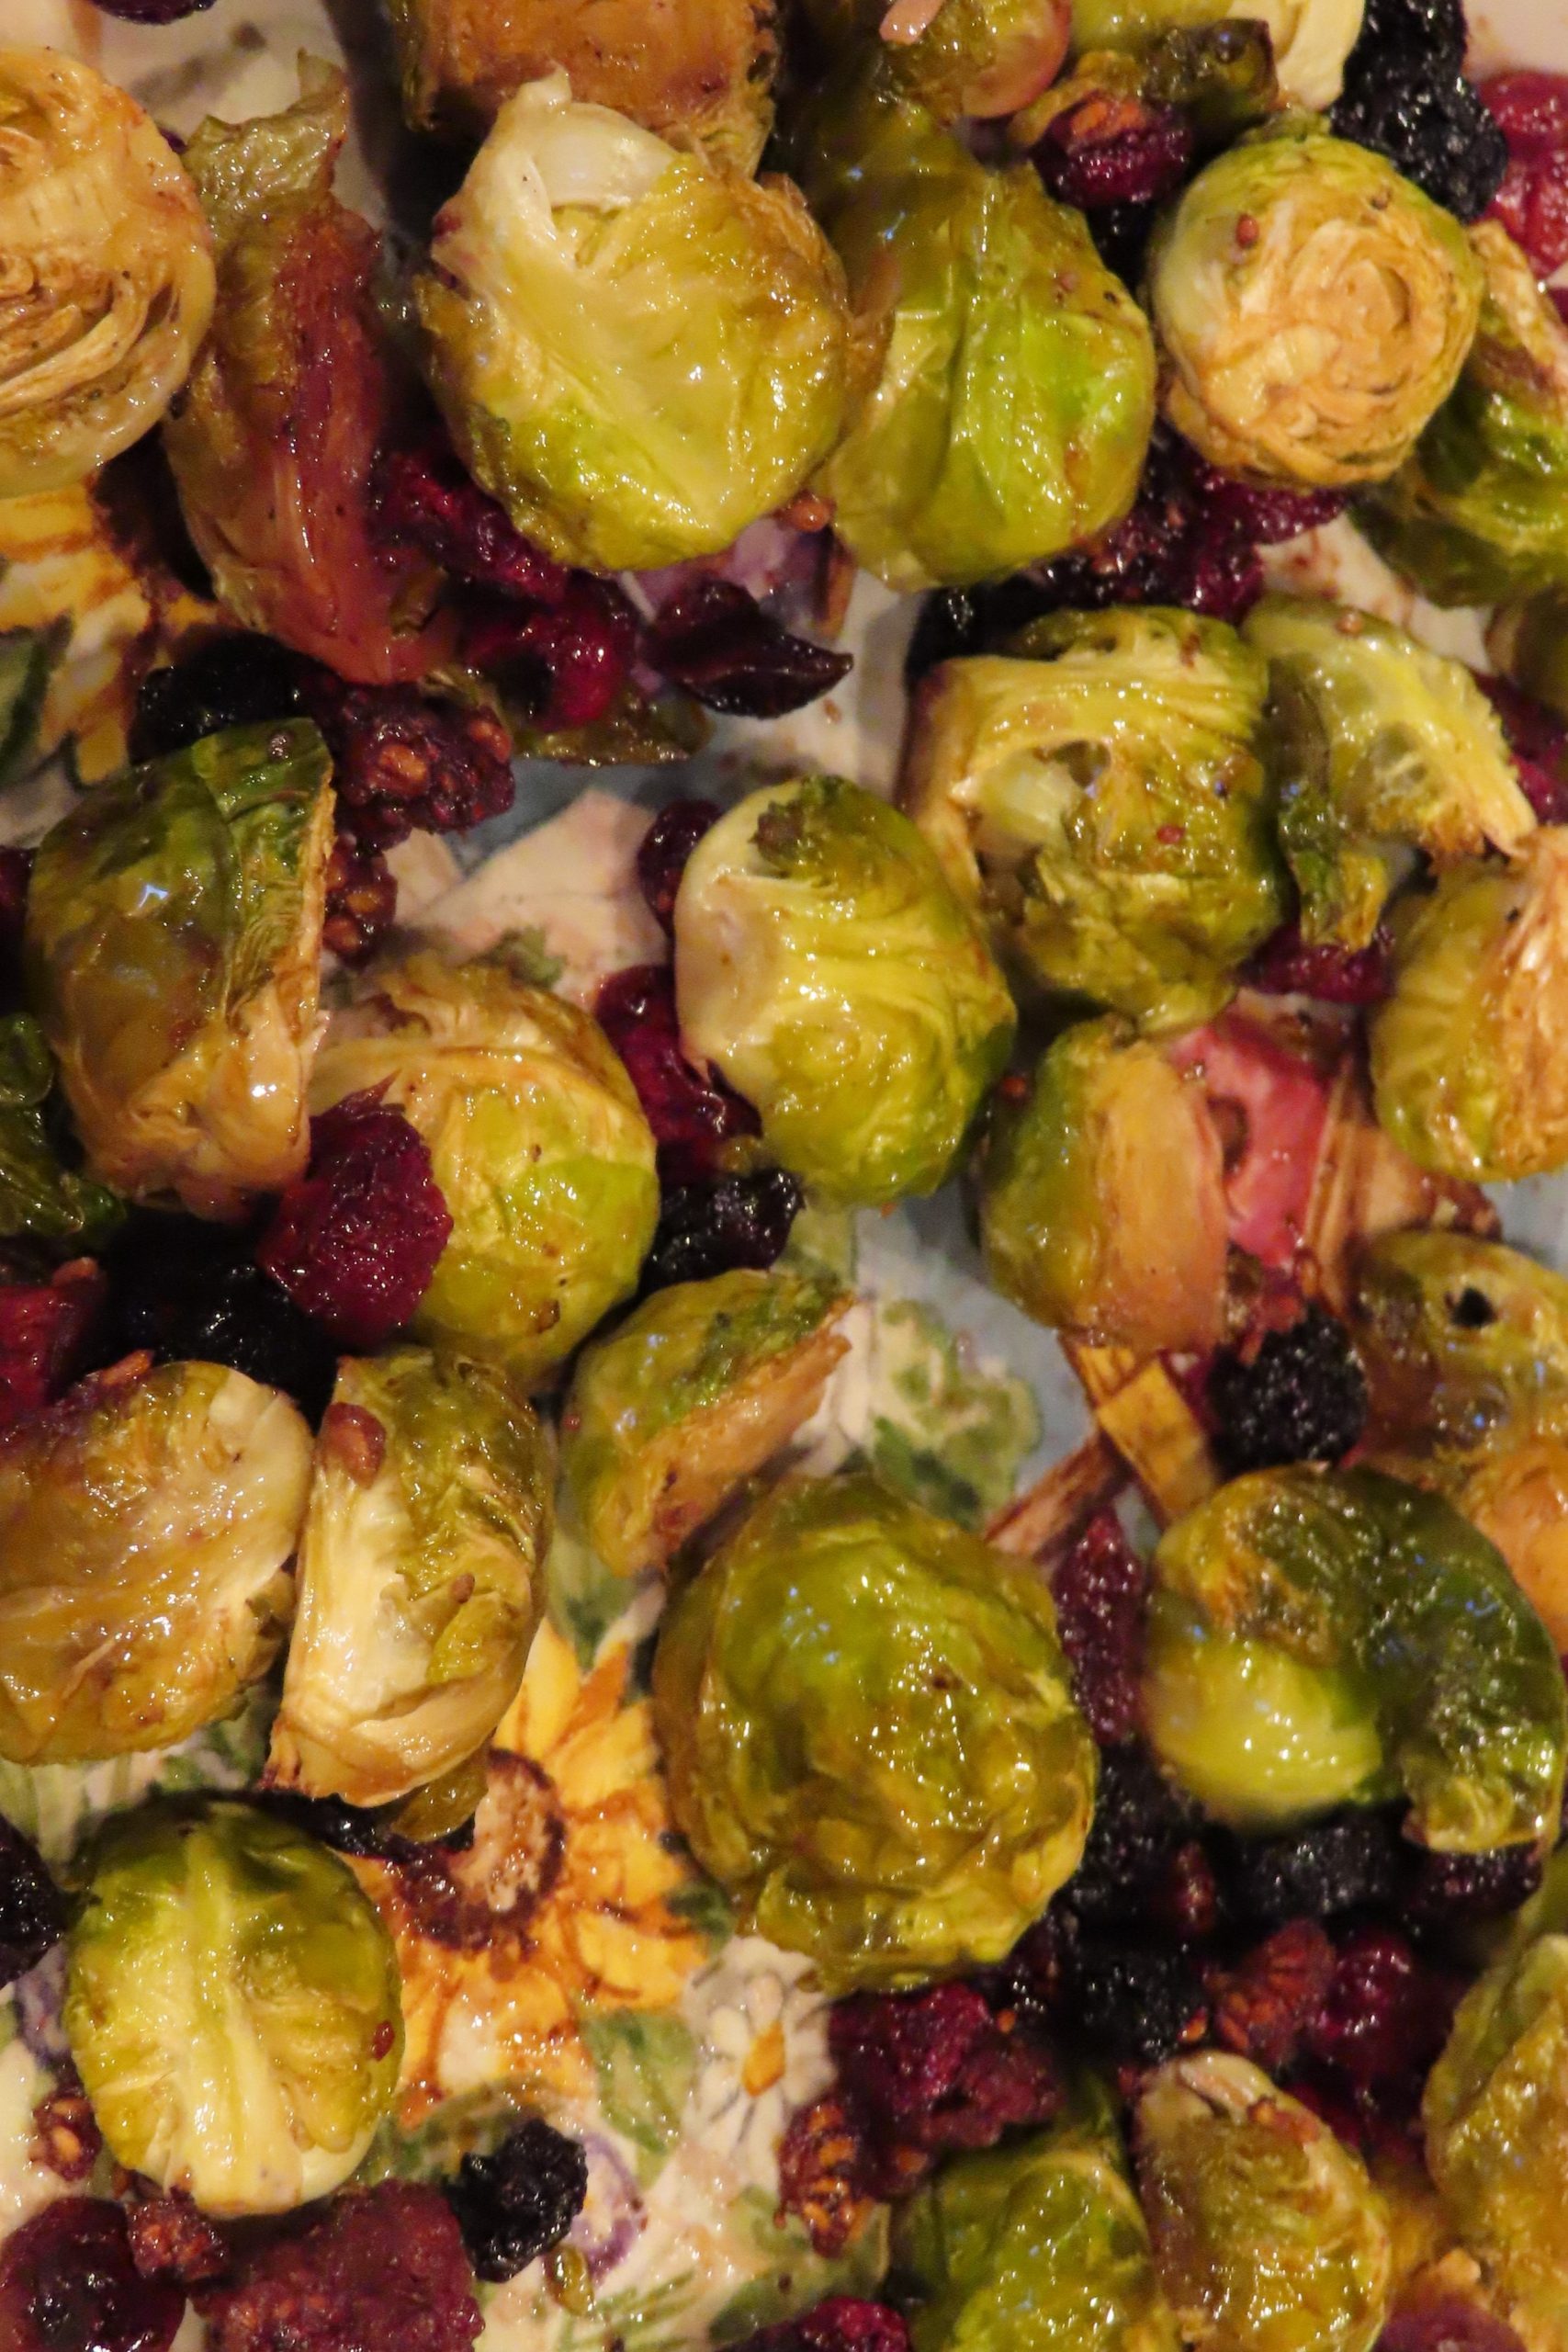 Candied Brussel Sprouts does not mean Loaded with Sugar